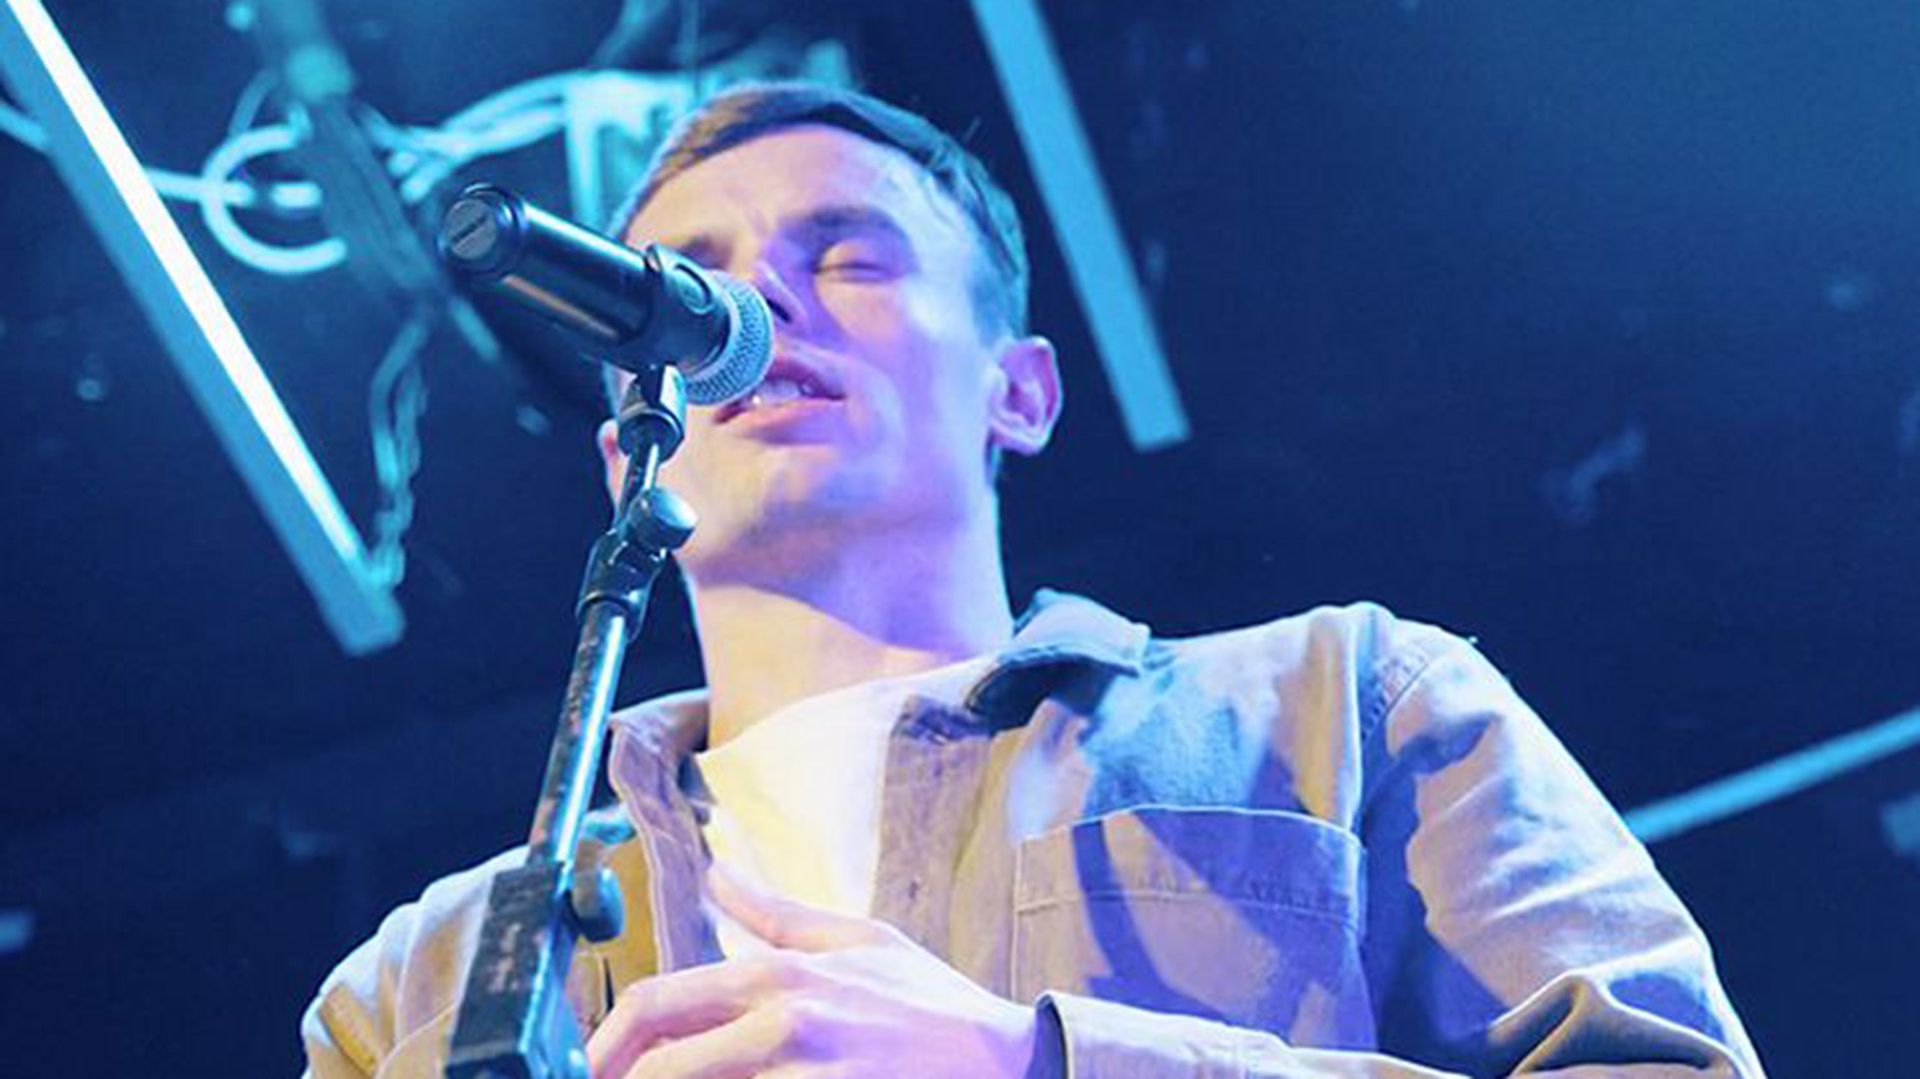 Photo of emotive-looking man reciting on a stage.